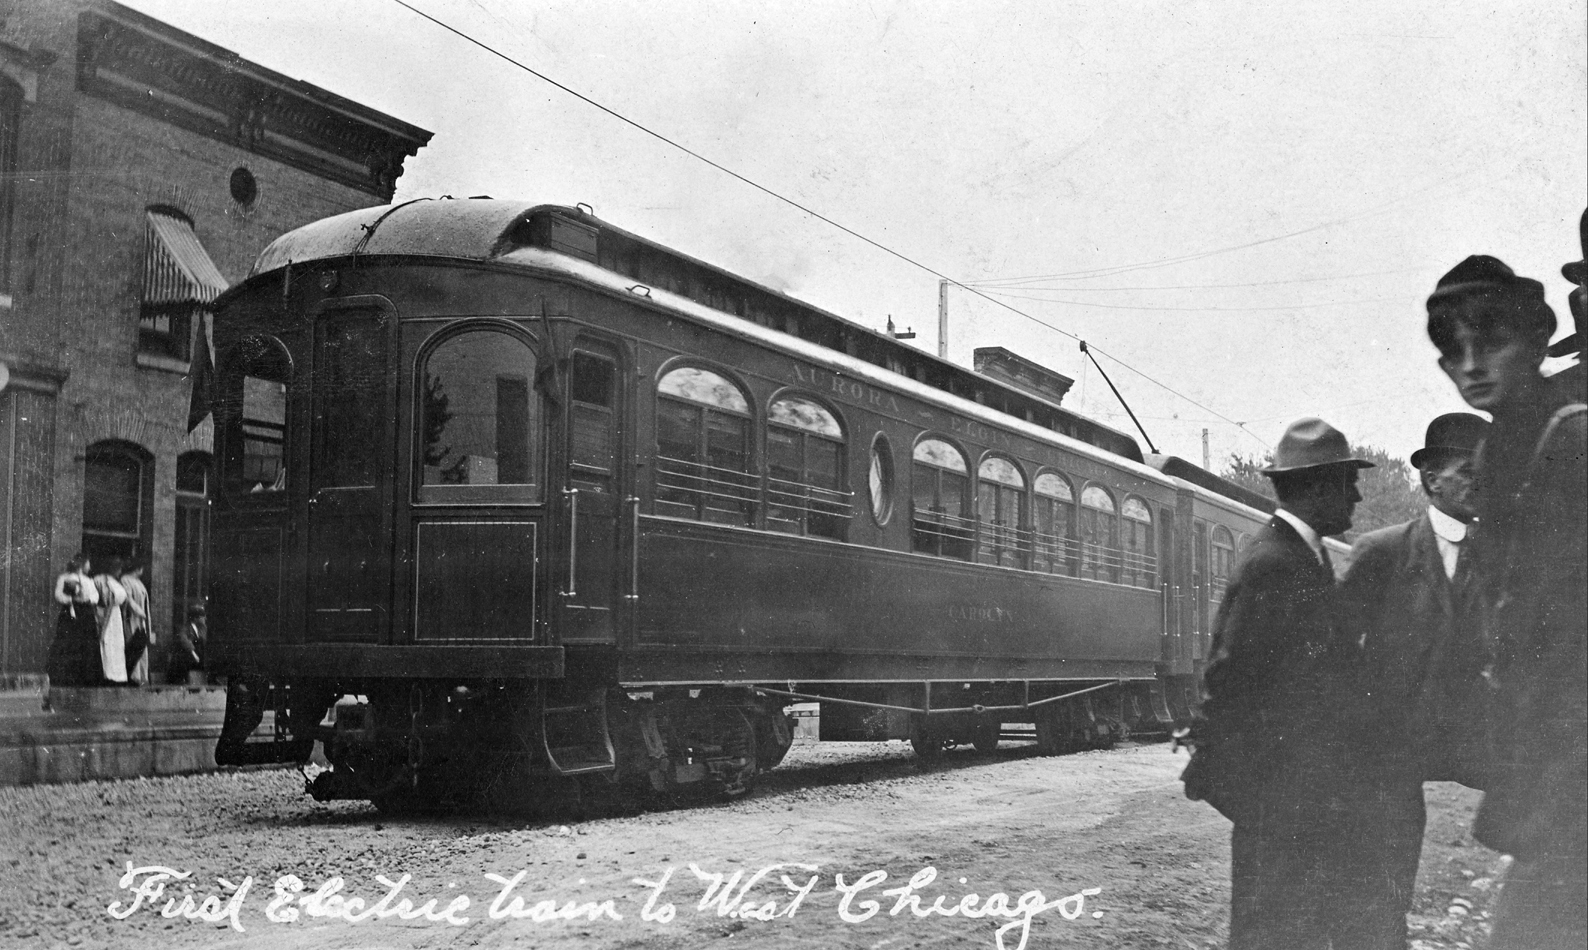 The Aurora, Elgin & Chicago Railroad (with service through West Chicago from 1909-1937)